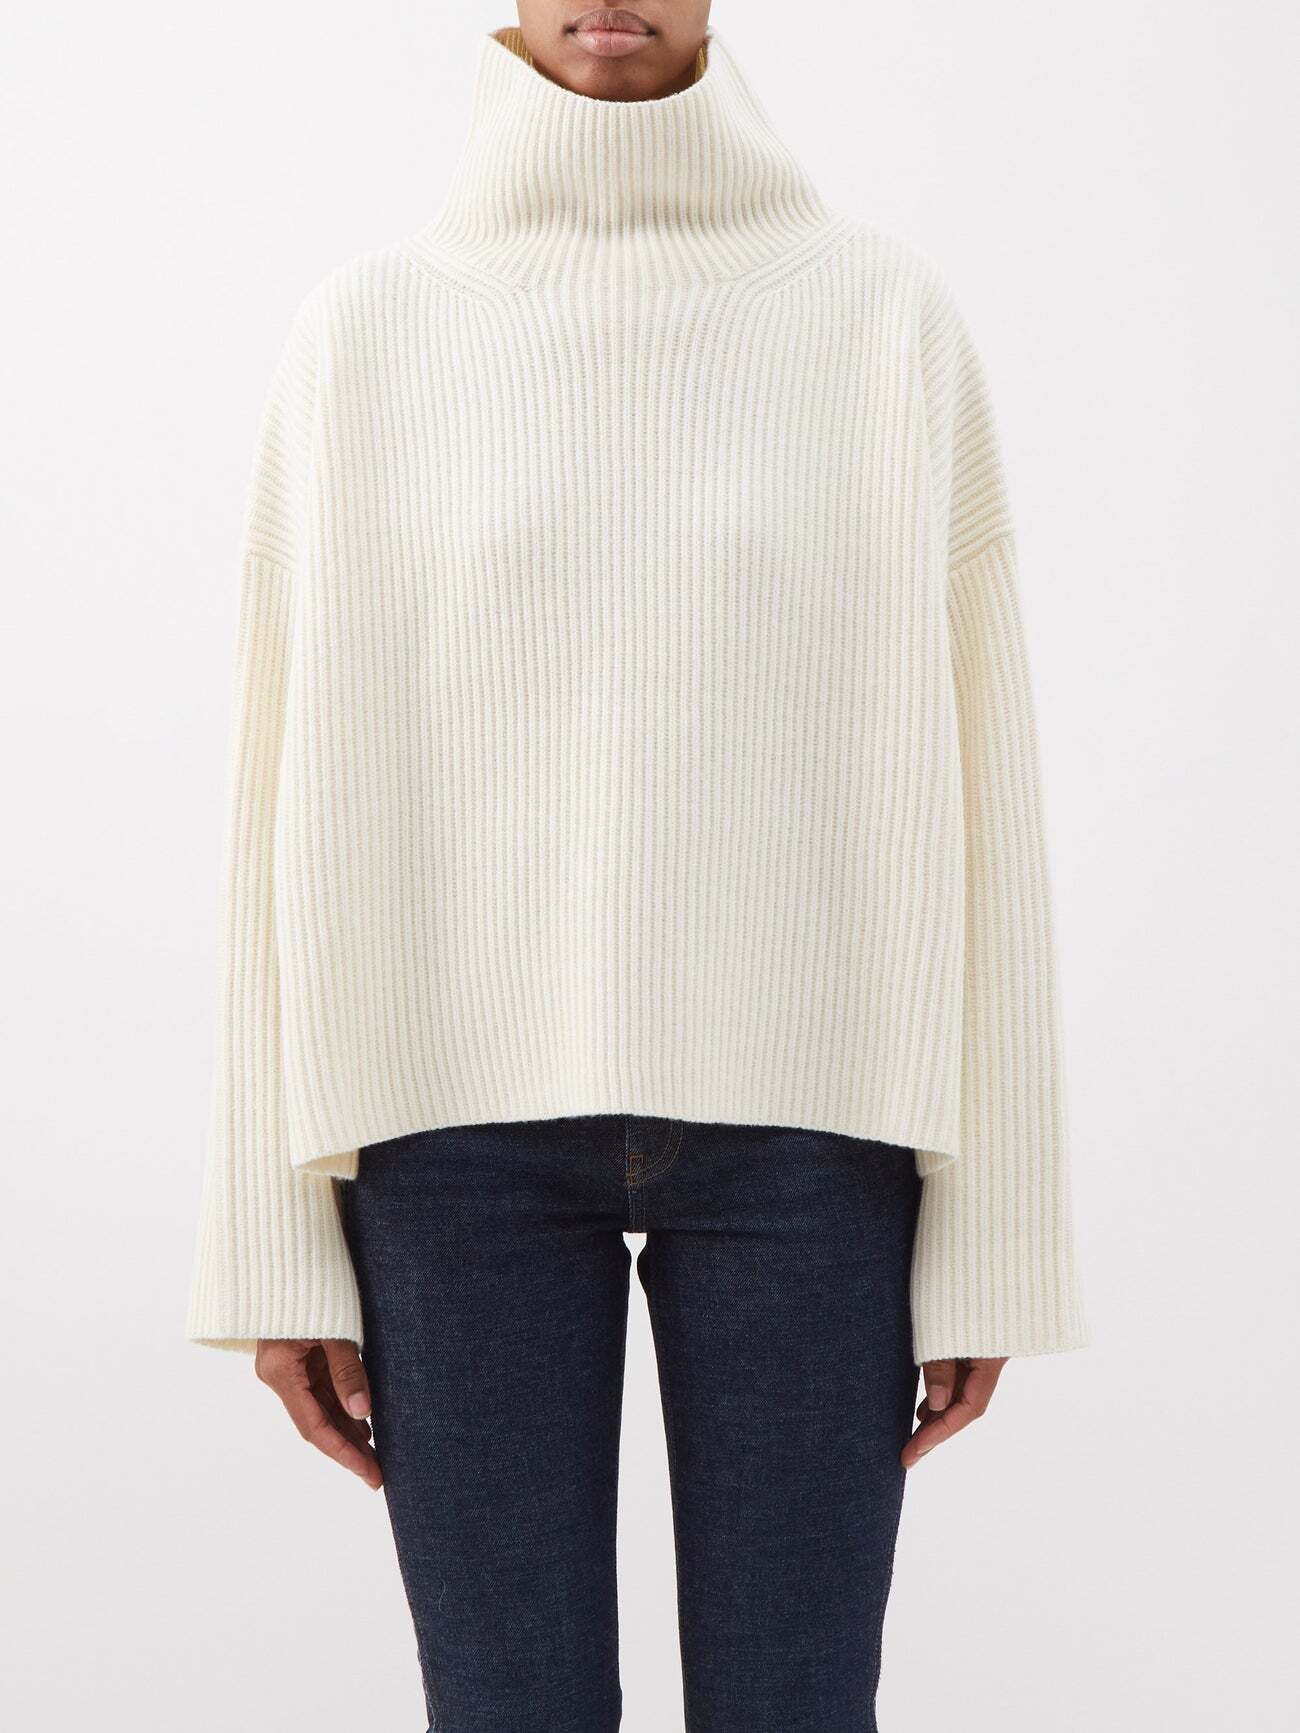 Toteme - High-neck Ribbed Wool-blend Sweater - Womens - White/ivory